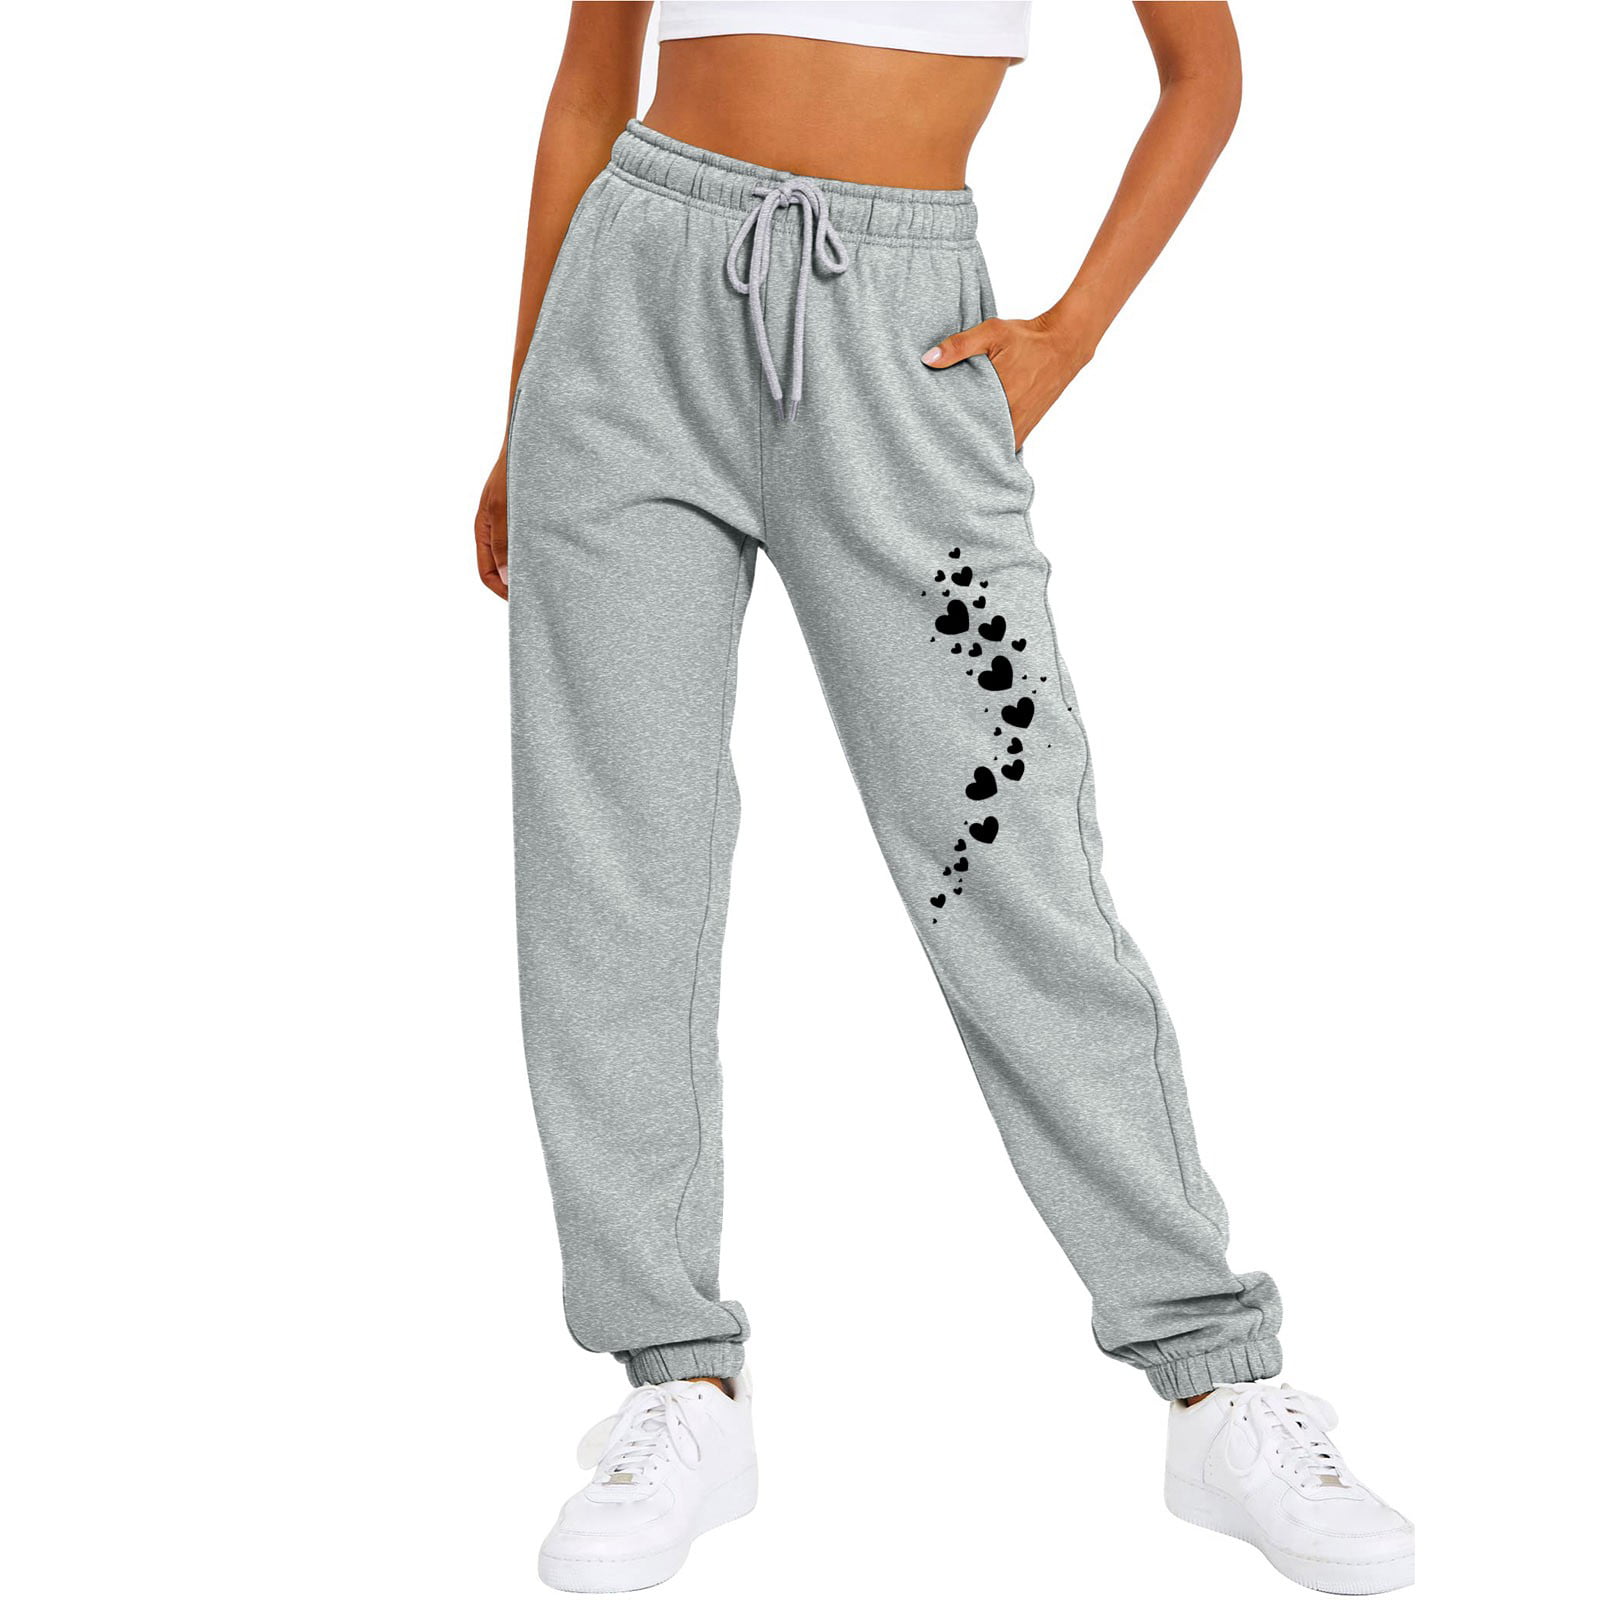 Aayomet Womens Joggers Womens Sweatpants Lightweight Cotton Joggers with Pockets  High Waisted Super Soft Workout Casual Sweat Pants,B M 